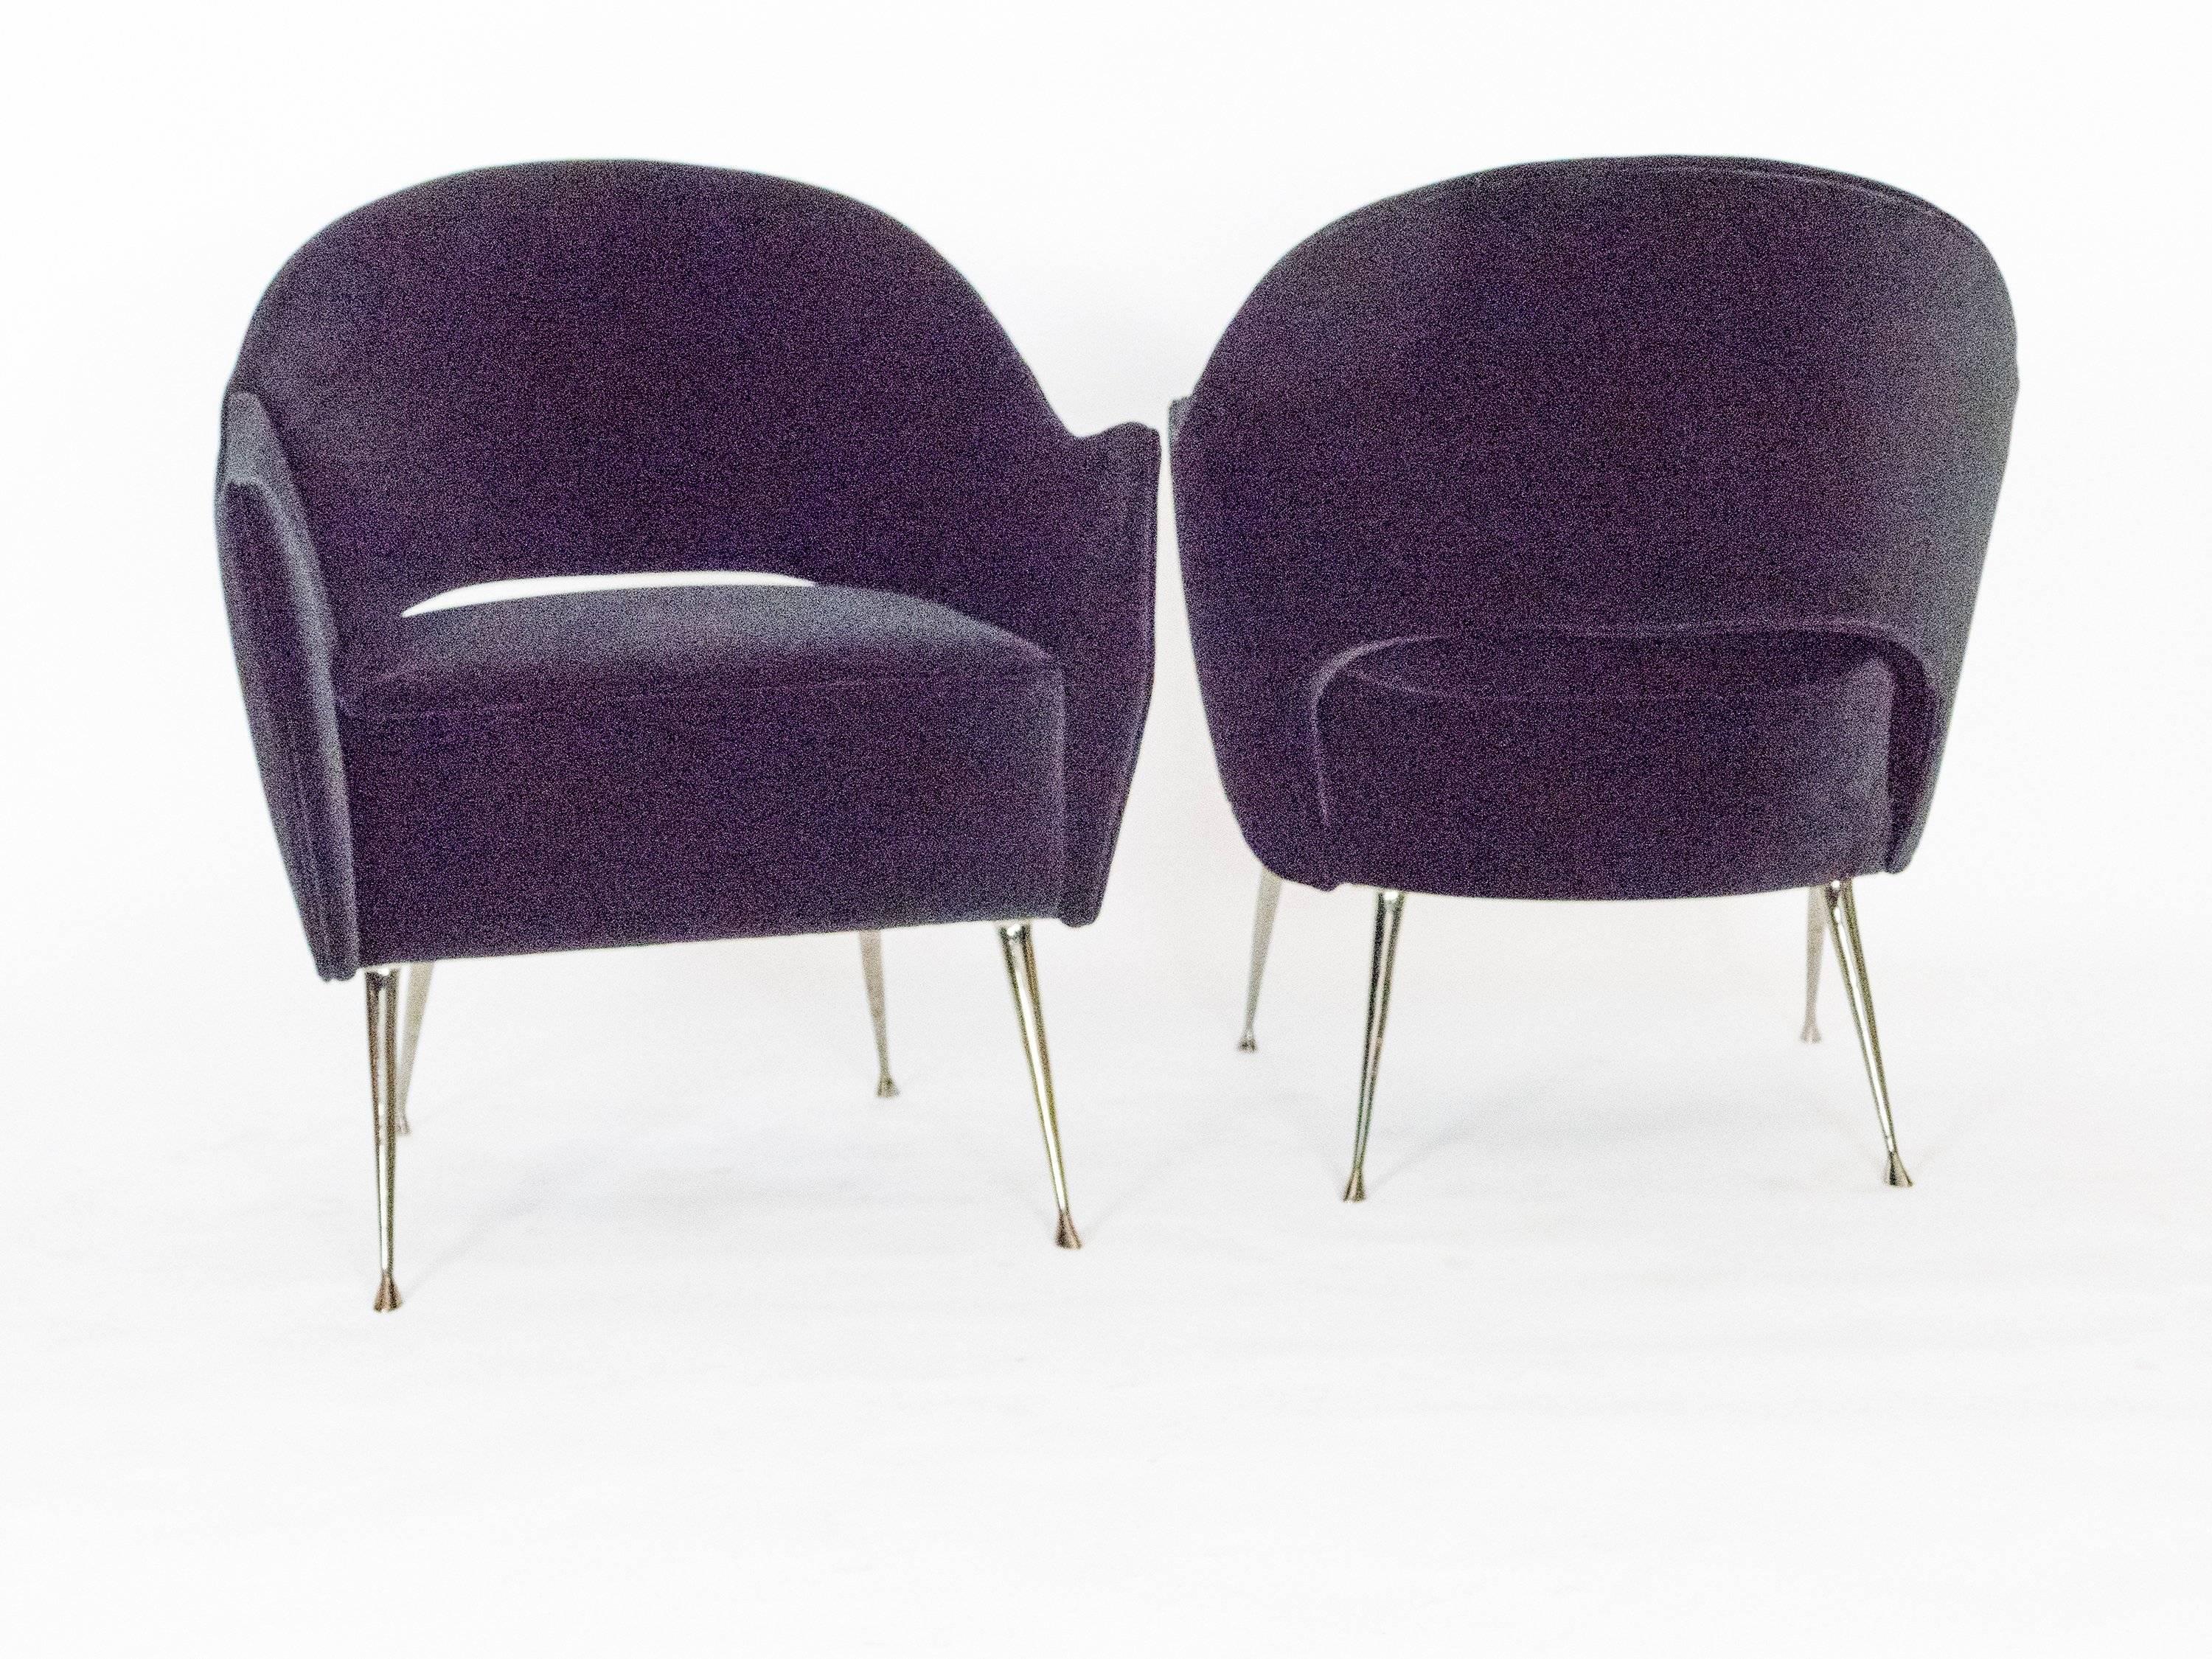 Mid-Century Modern Pair of Briance Chairs by Bourgeois Boheme, Black Nickel